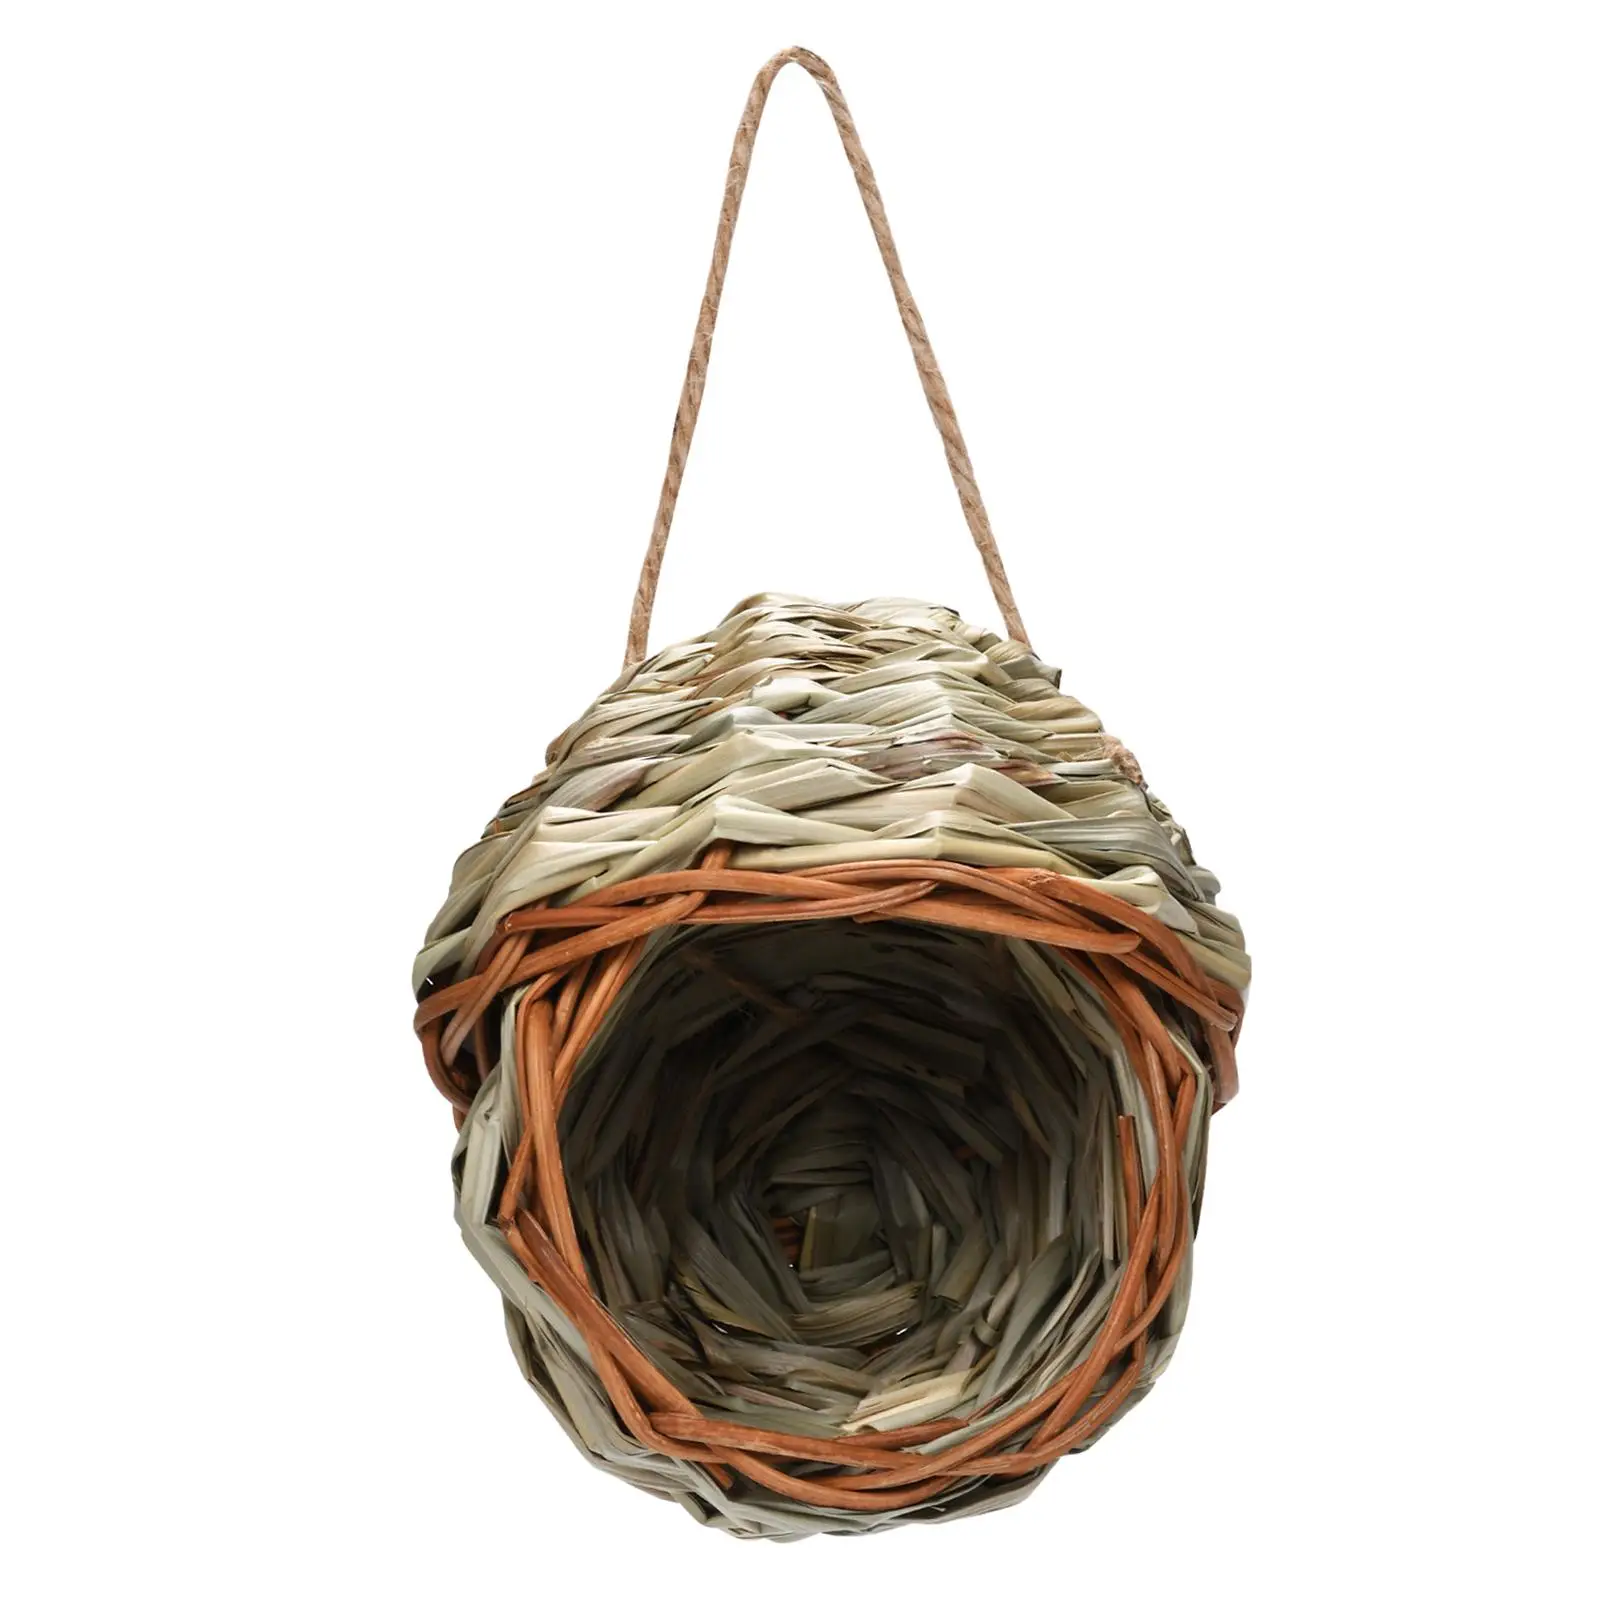 Grass Hanging Bird House Bird Nest Roosting Cozy Resting Place Bird Hut Hand Woven for Finch Outdoor Patio Decoration Outside